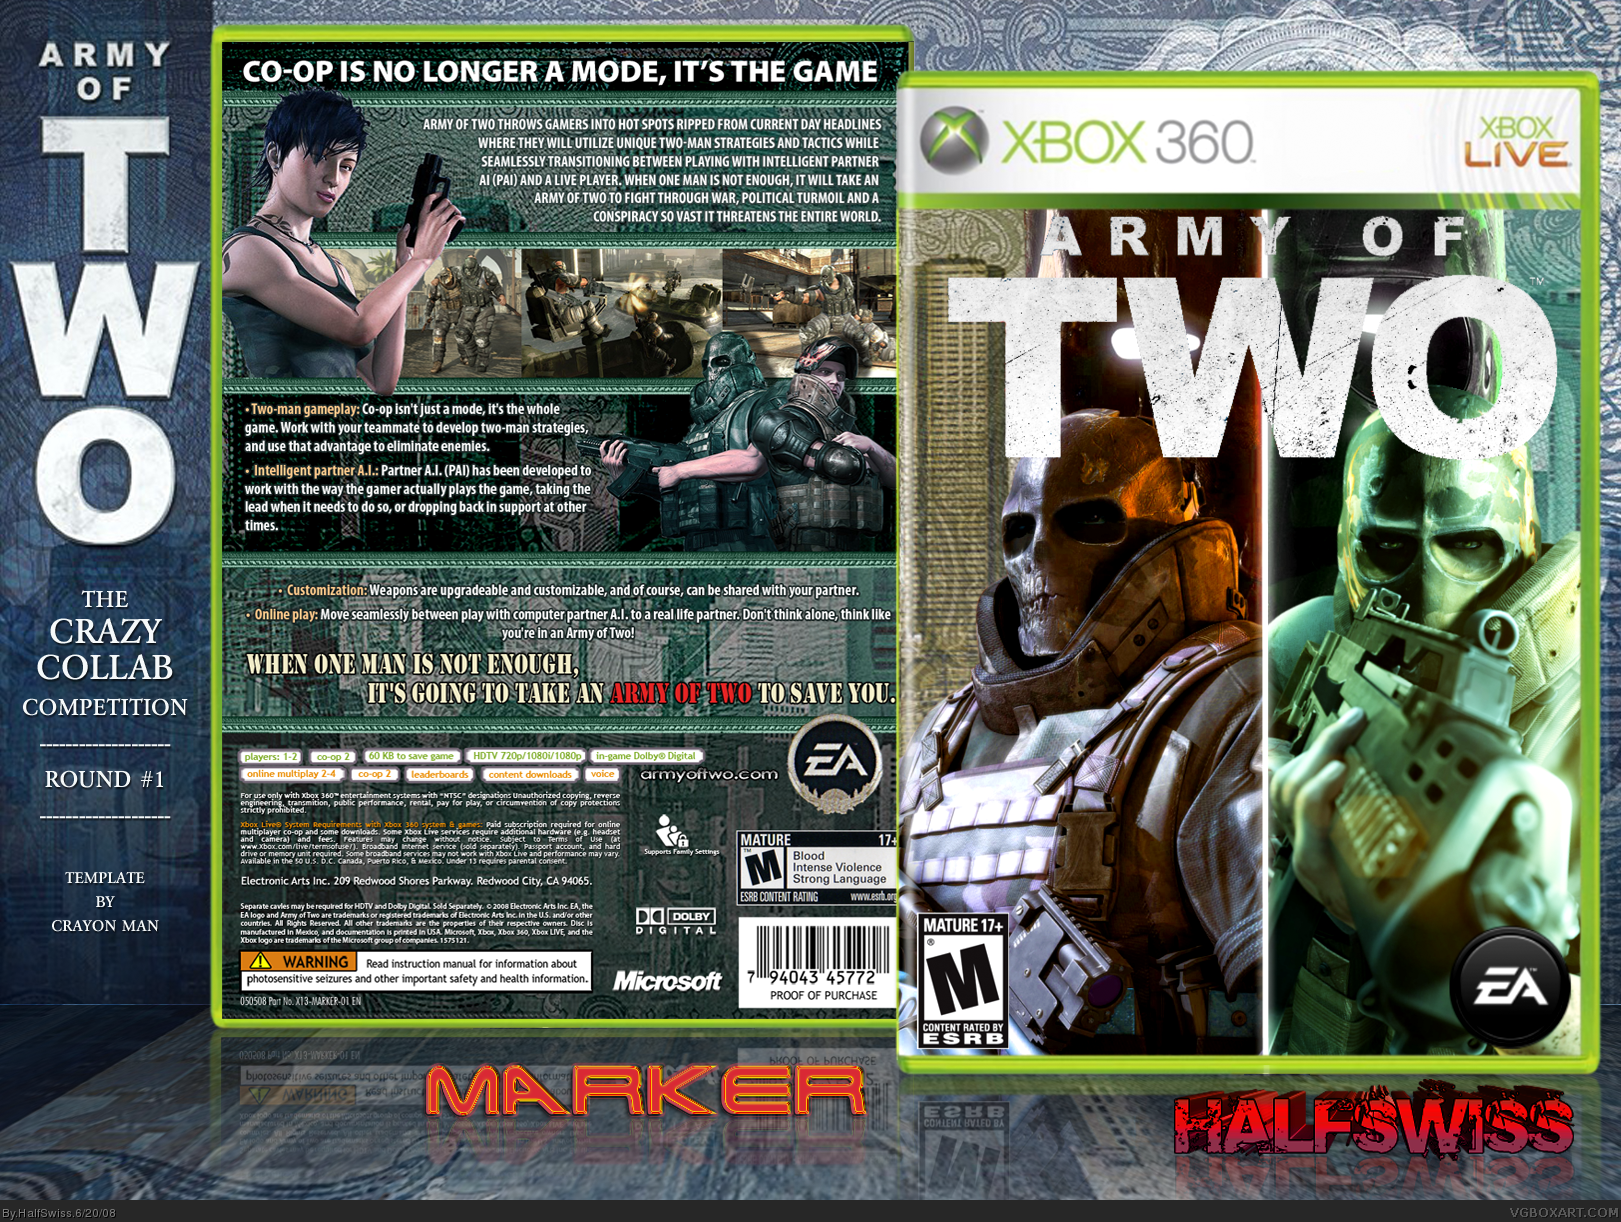 Army of Two box cover